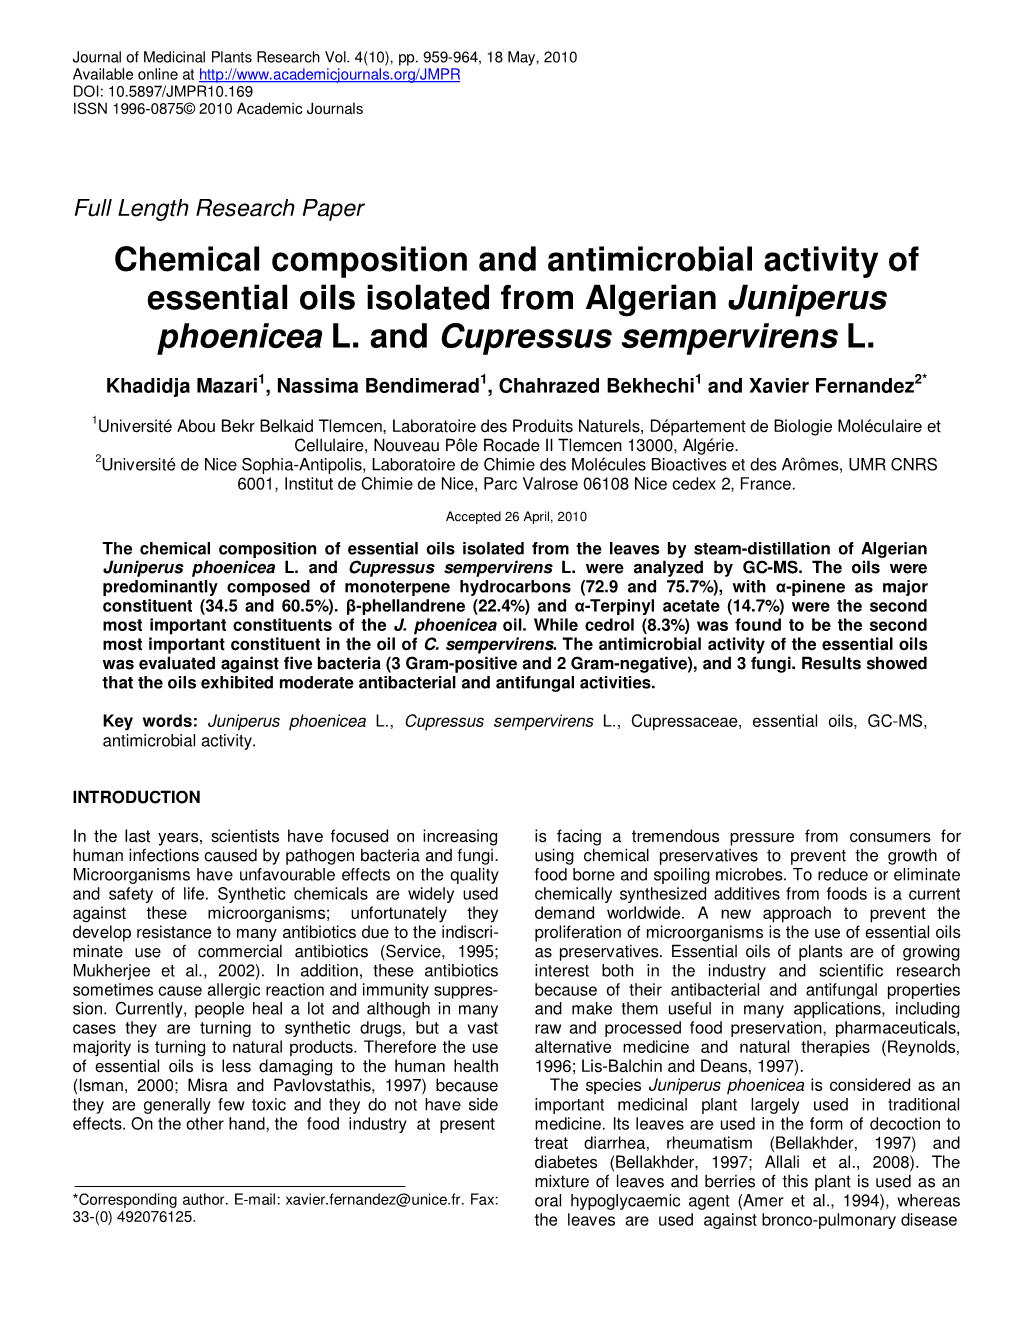 Chemical Composition and Antimicrobial Activity of Essential Oils Isolated from Algerian Juniperus Phoenicea L